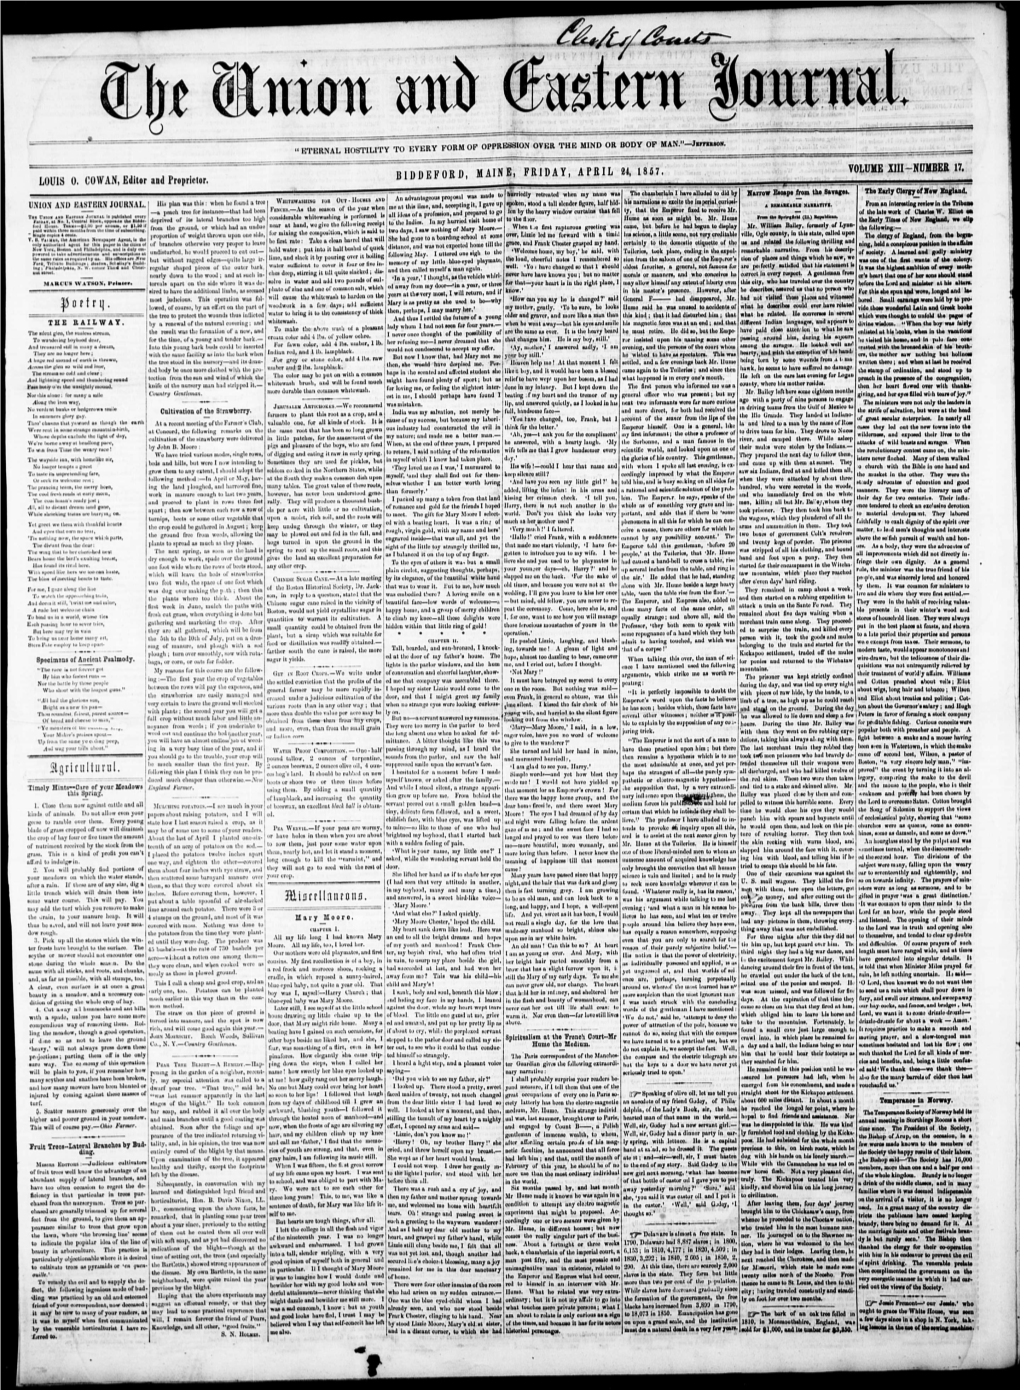 The Union and Eastern Journal: Vol. 13, No. 17 April 24, 1857